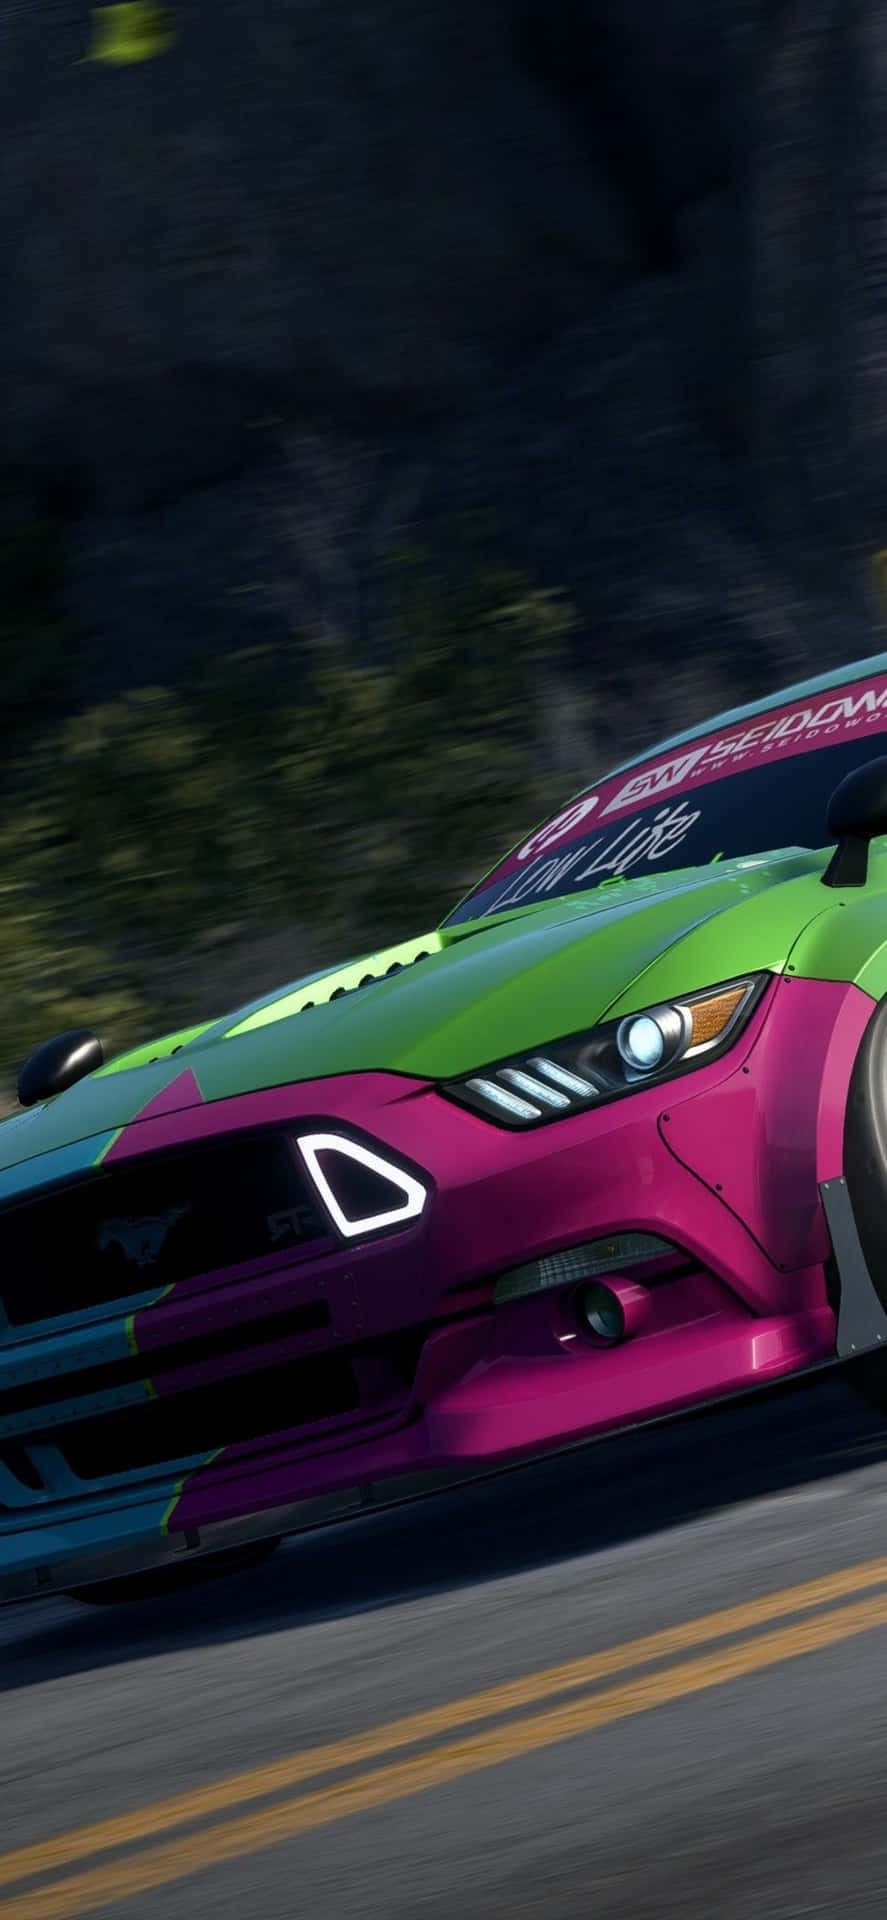 A Colorful Mustang Racing Car Is Driving Down A Mountain